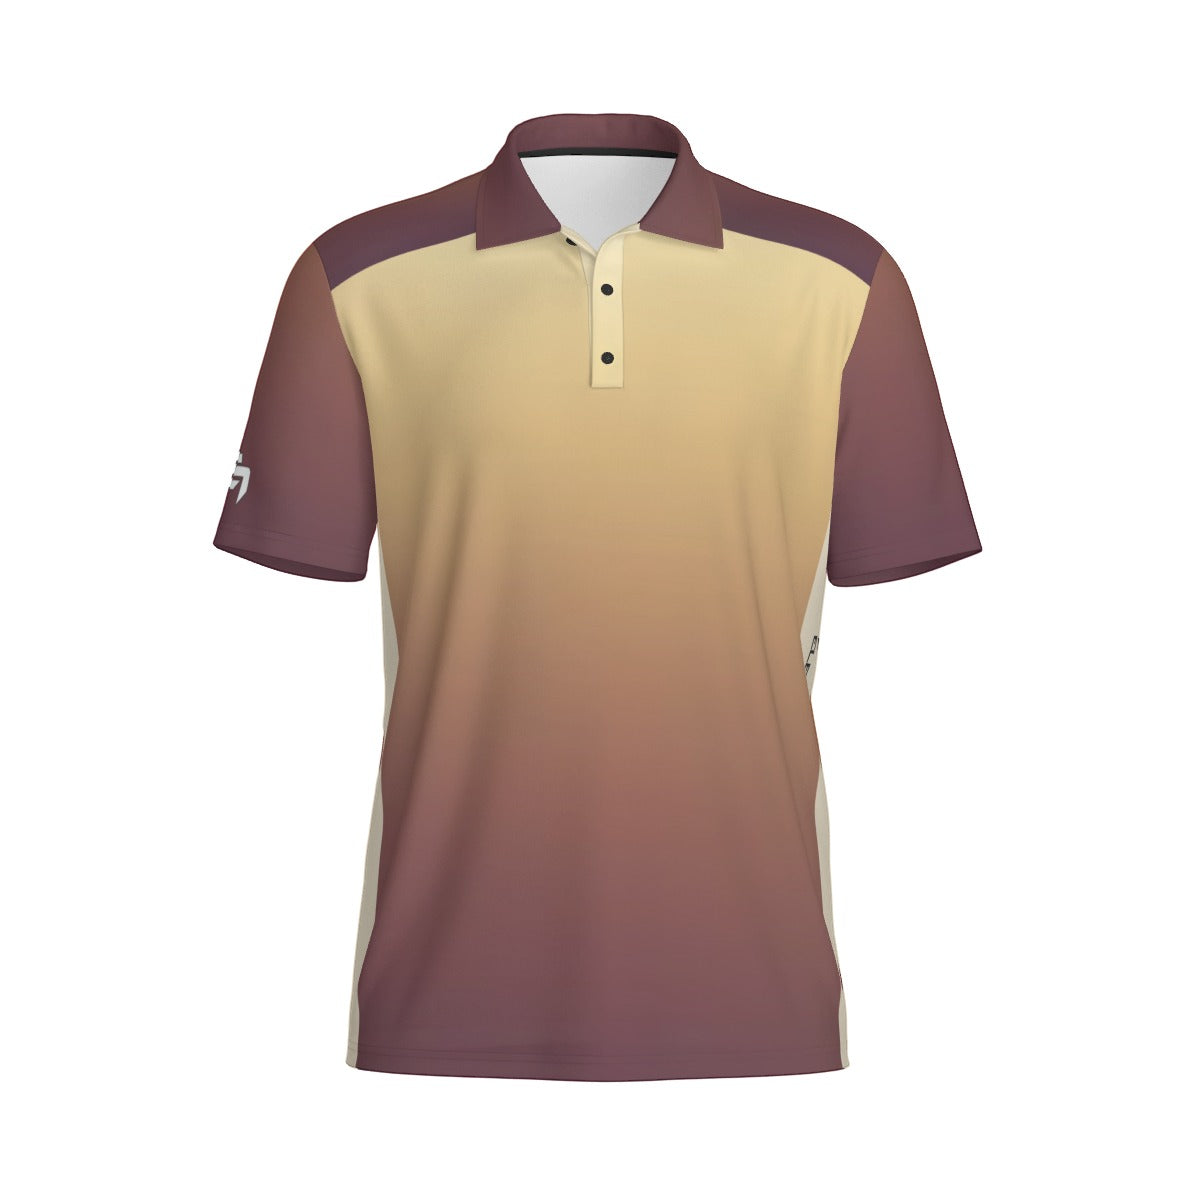 Elevated Breathable strecthy tight fitting golf polo